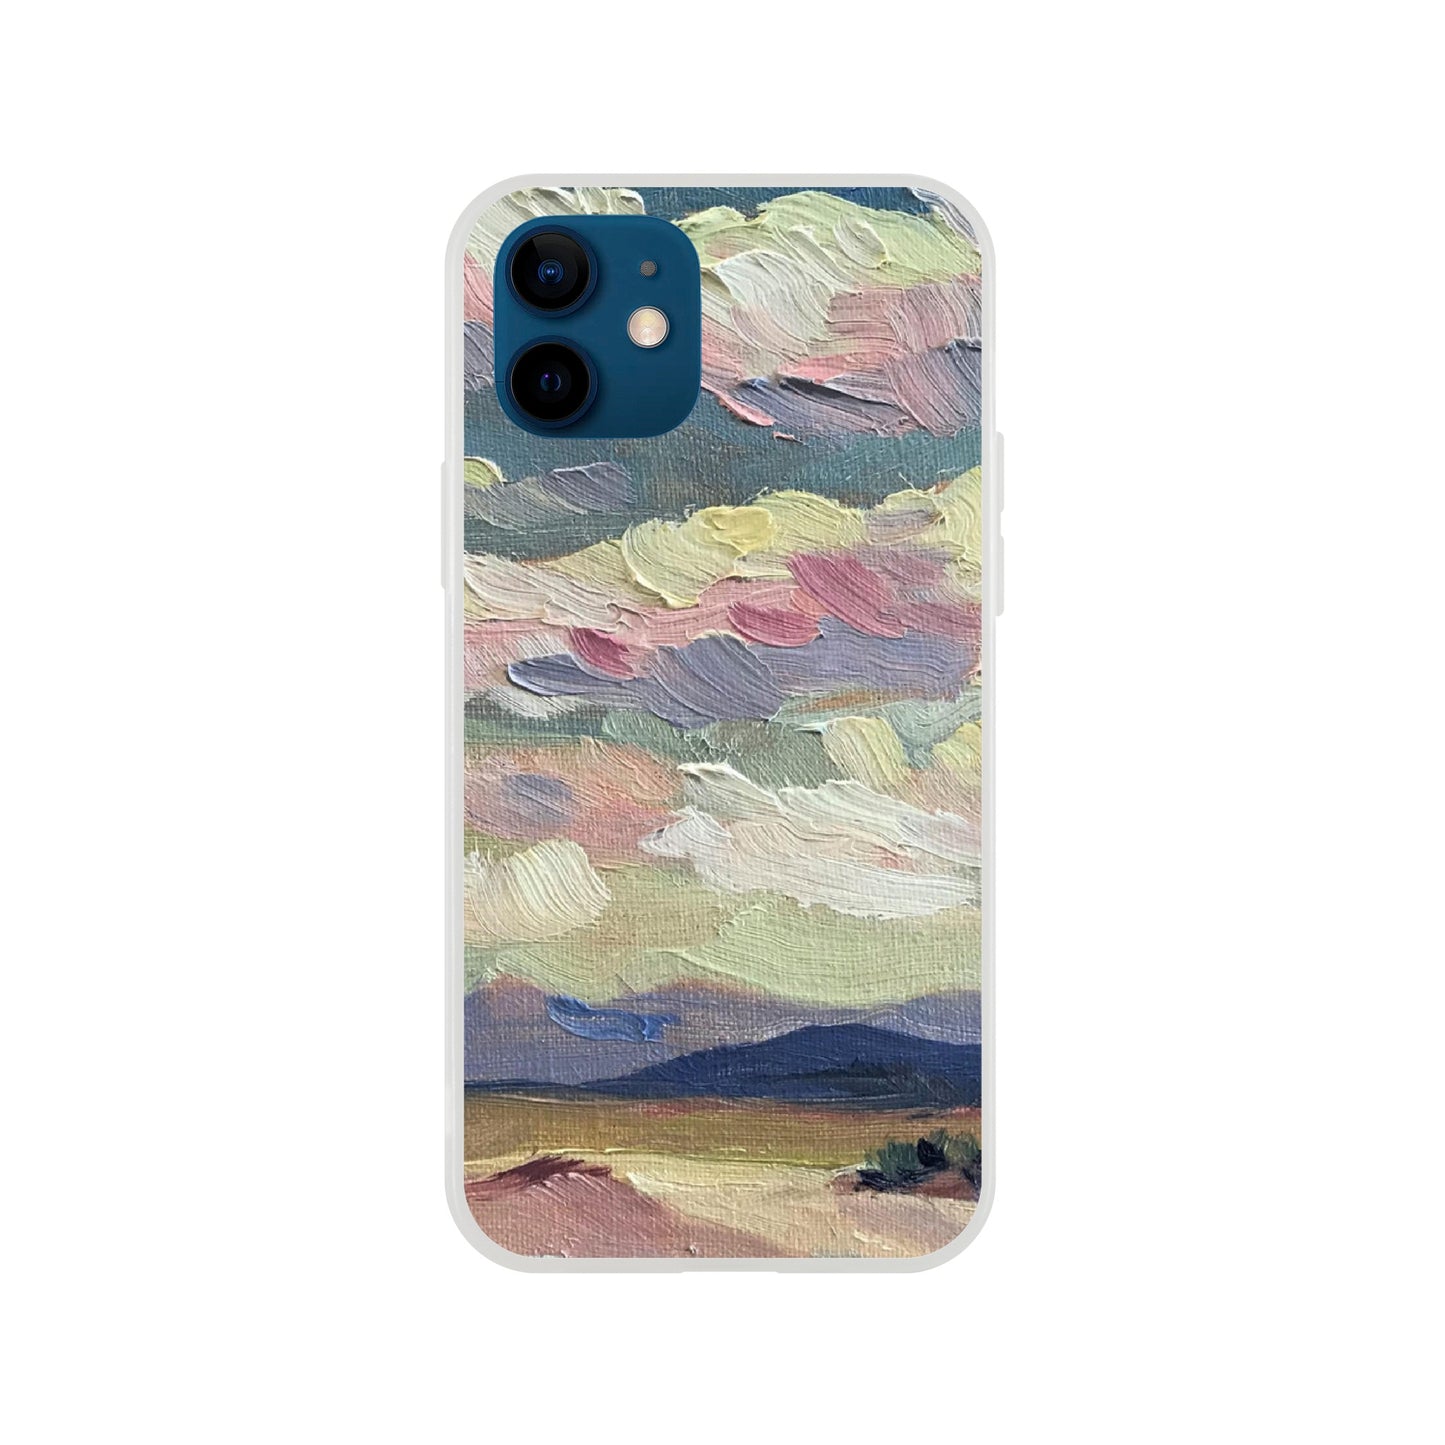 "Rio Chama" Flexi Phone Case for Iphone or Samsung by Barbara Cleary Designs